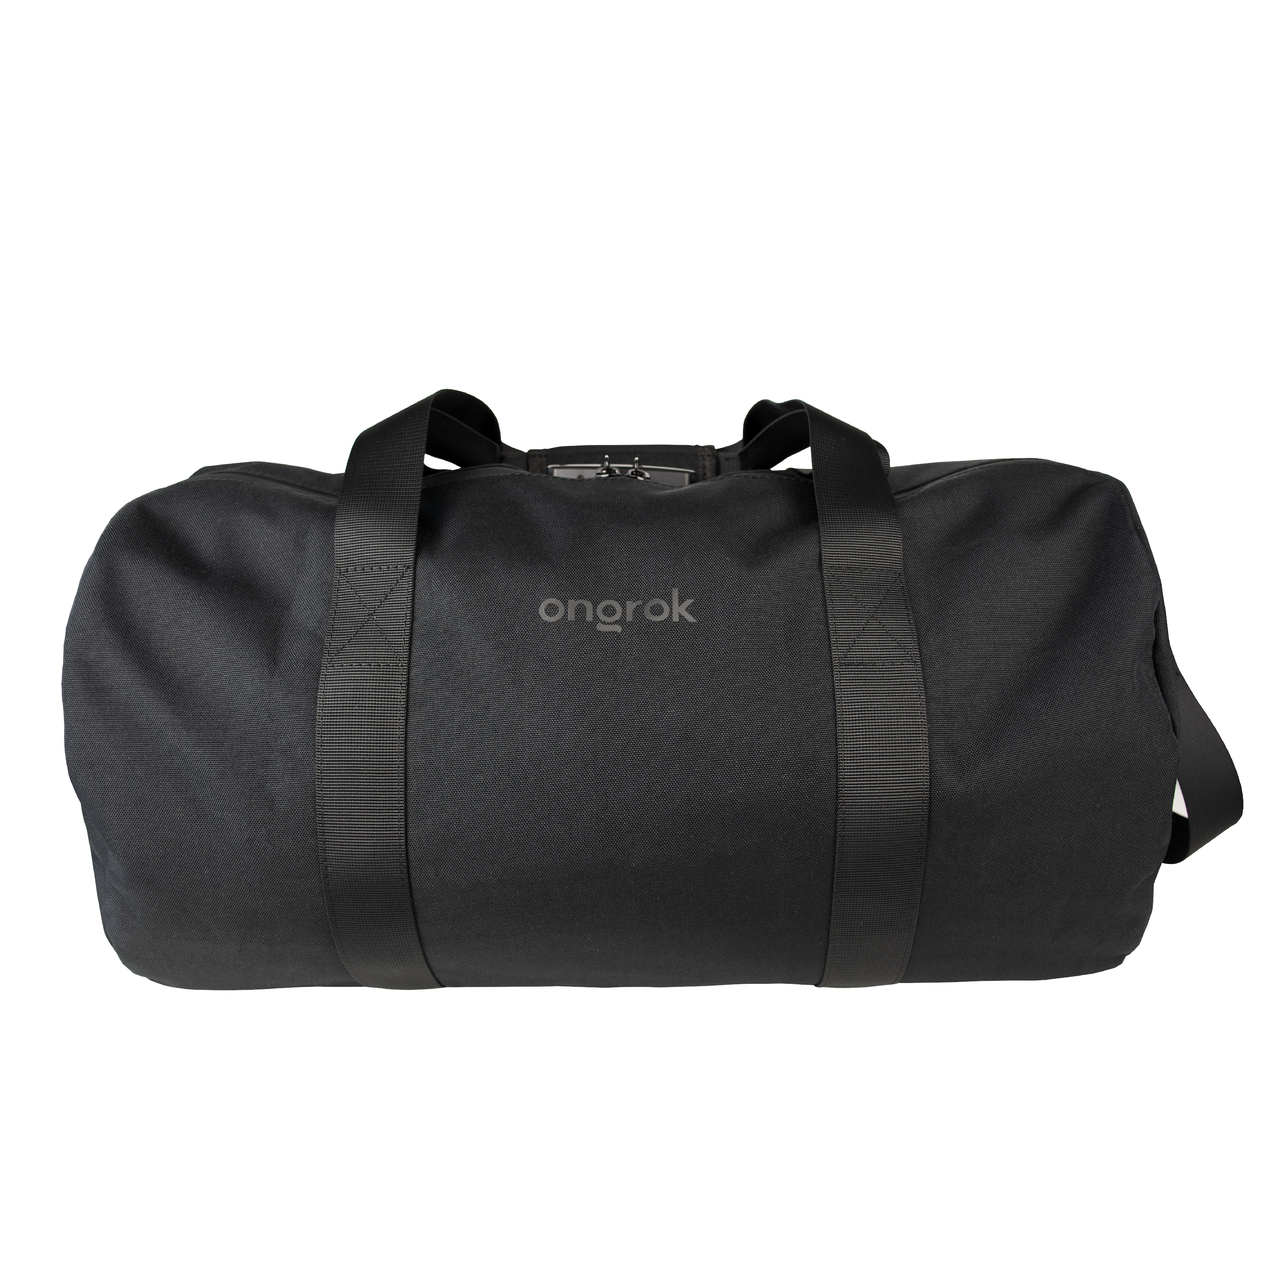 Ongrok Carbon-Lined Smell Proof Duffle Bag